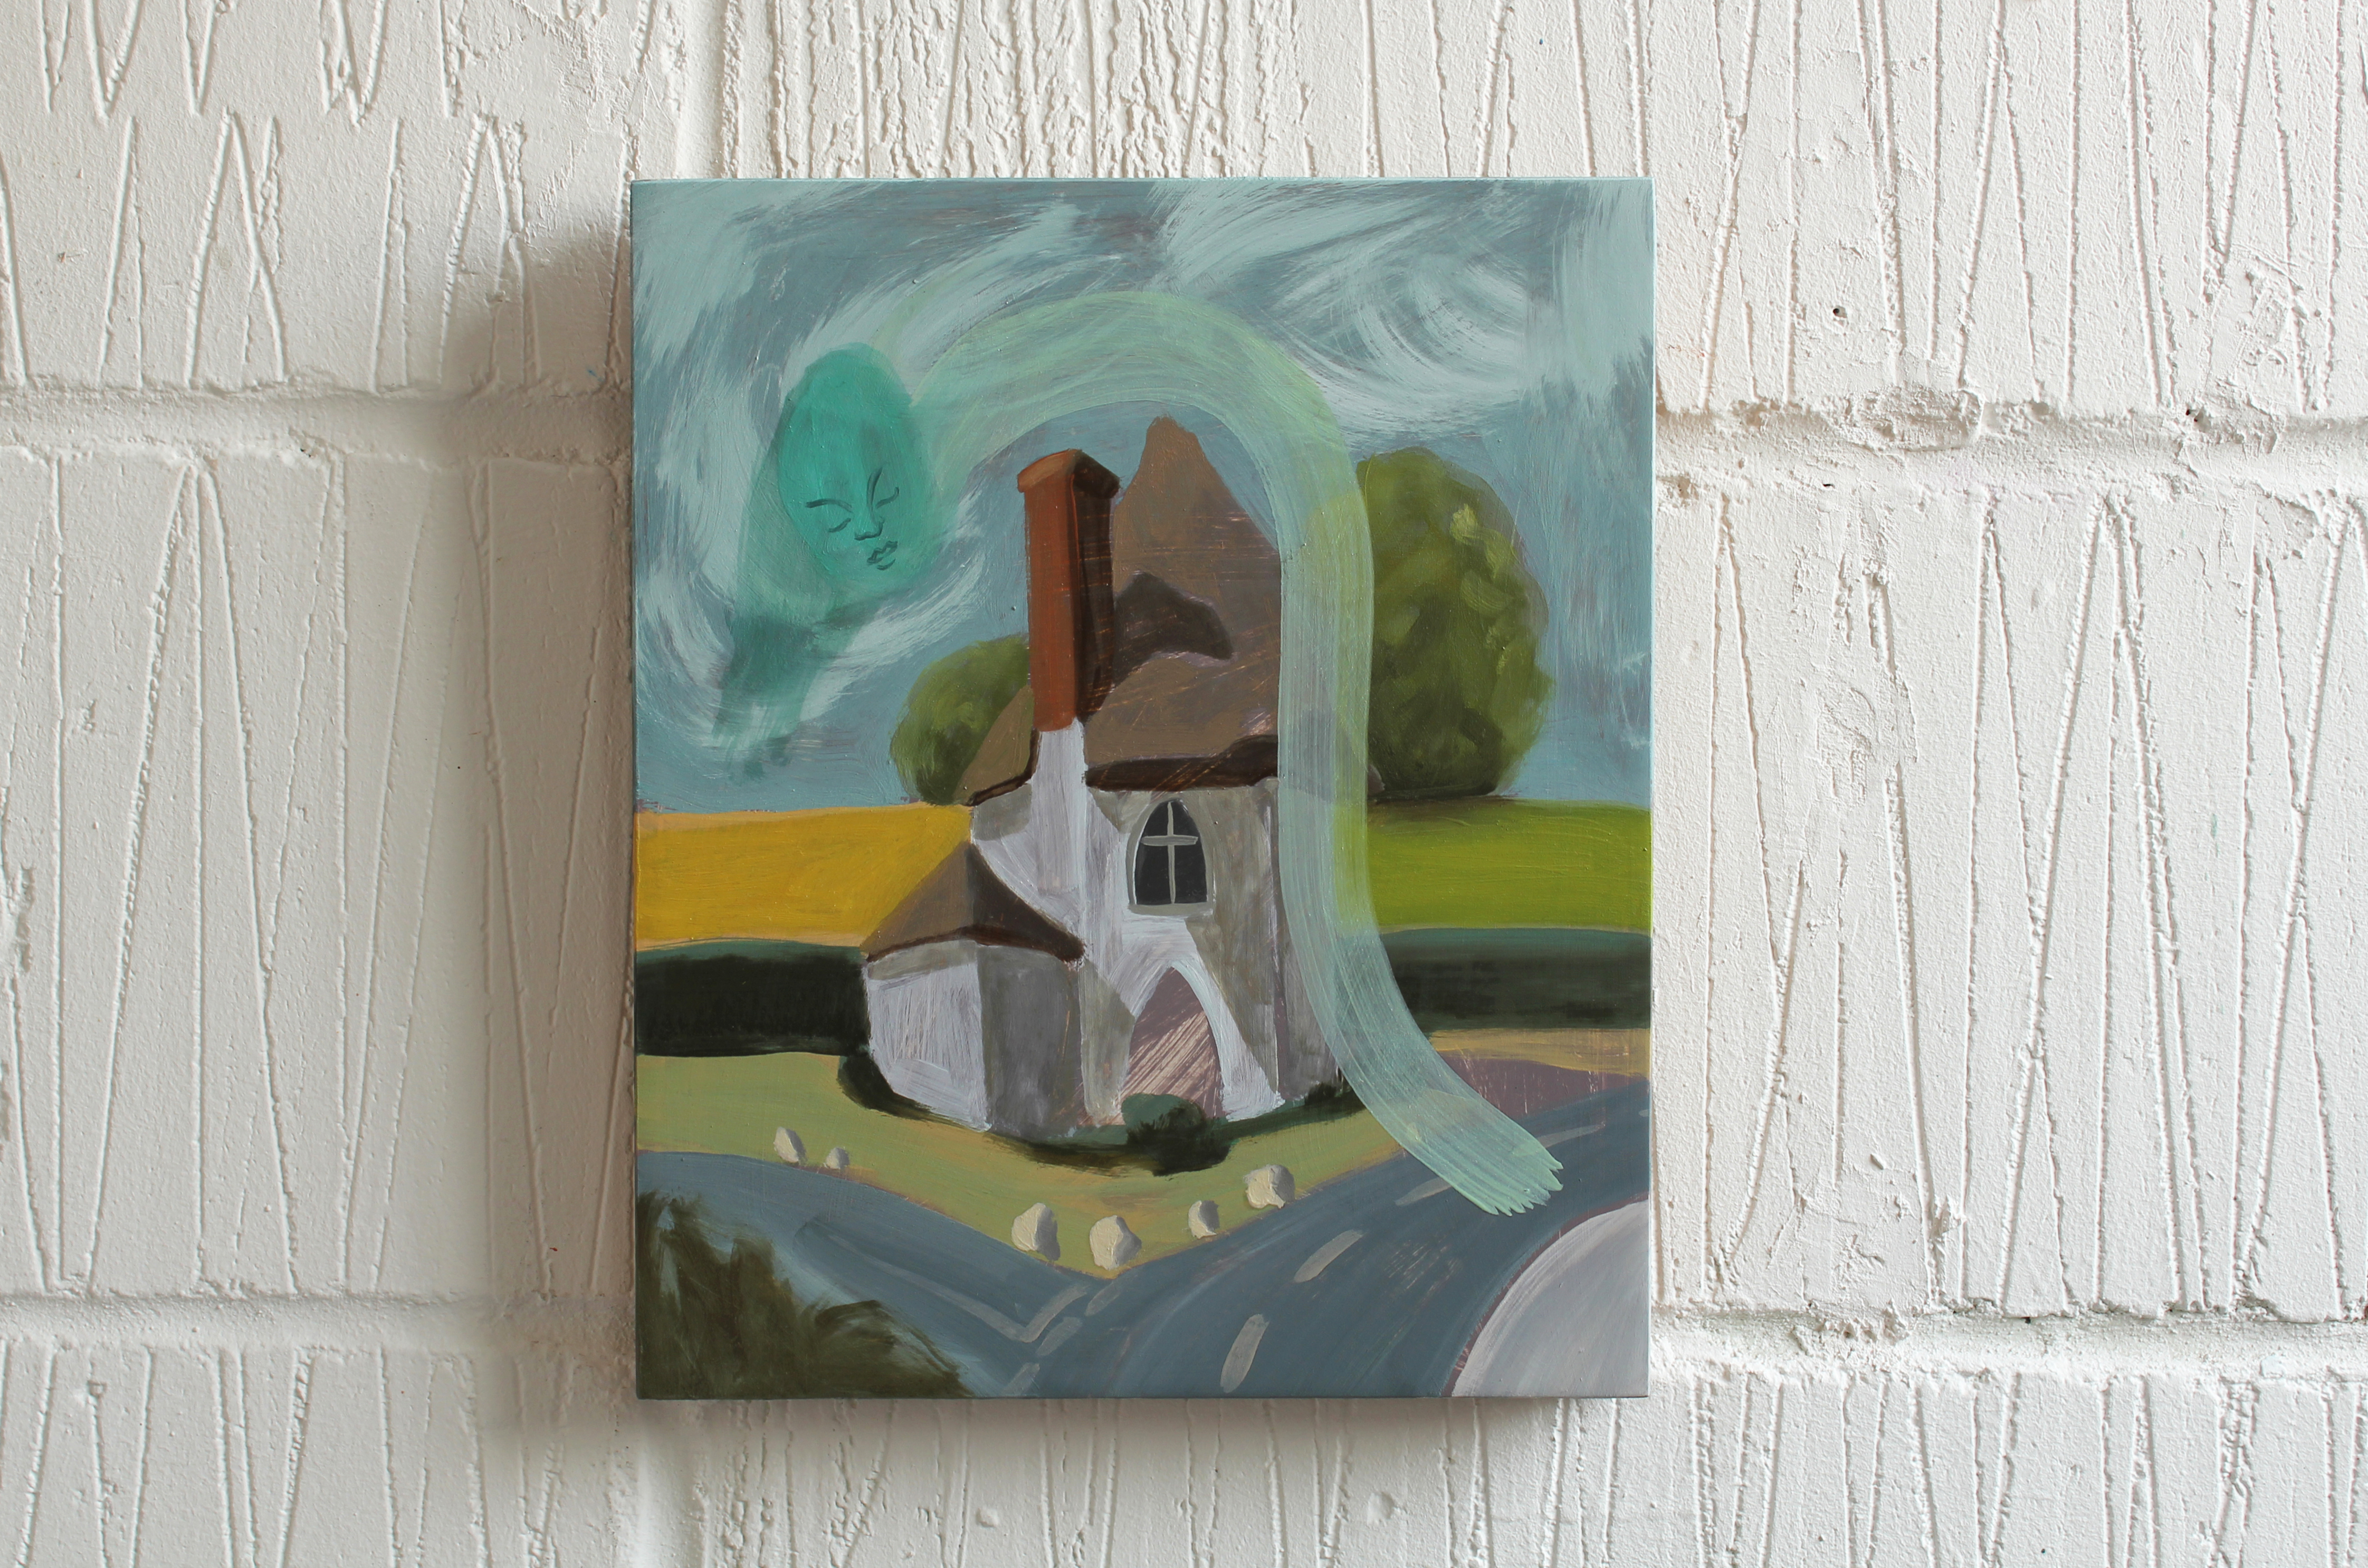 'Cottage 15' on the wall